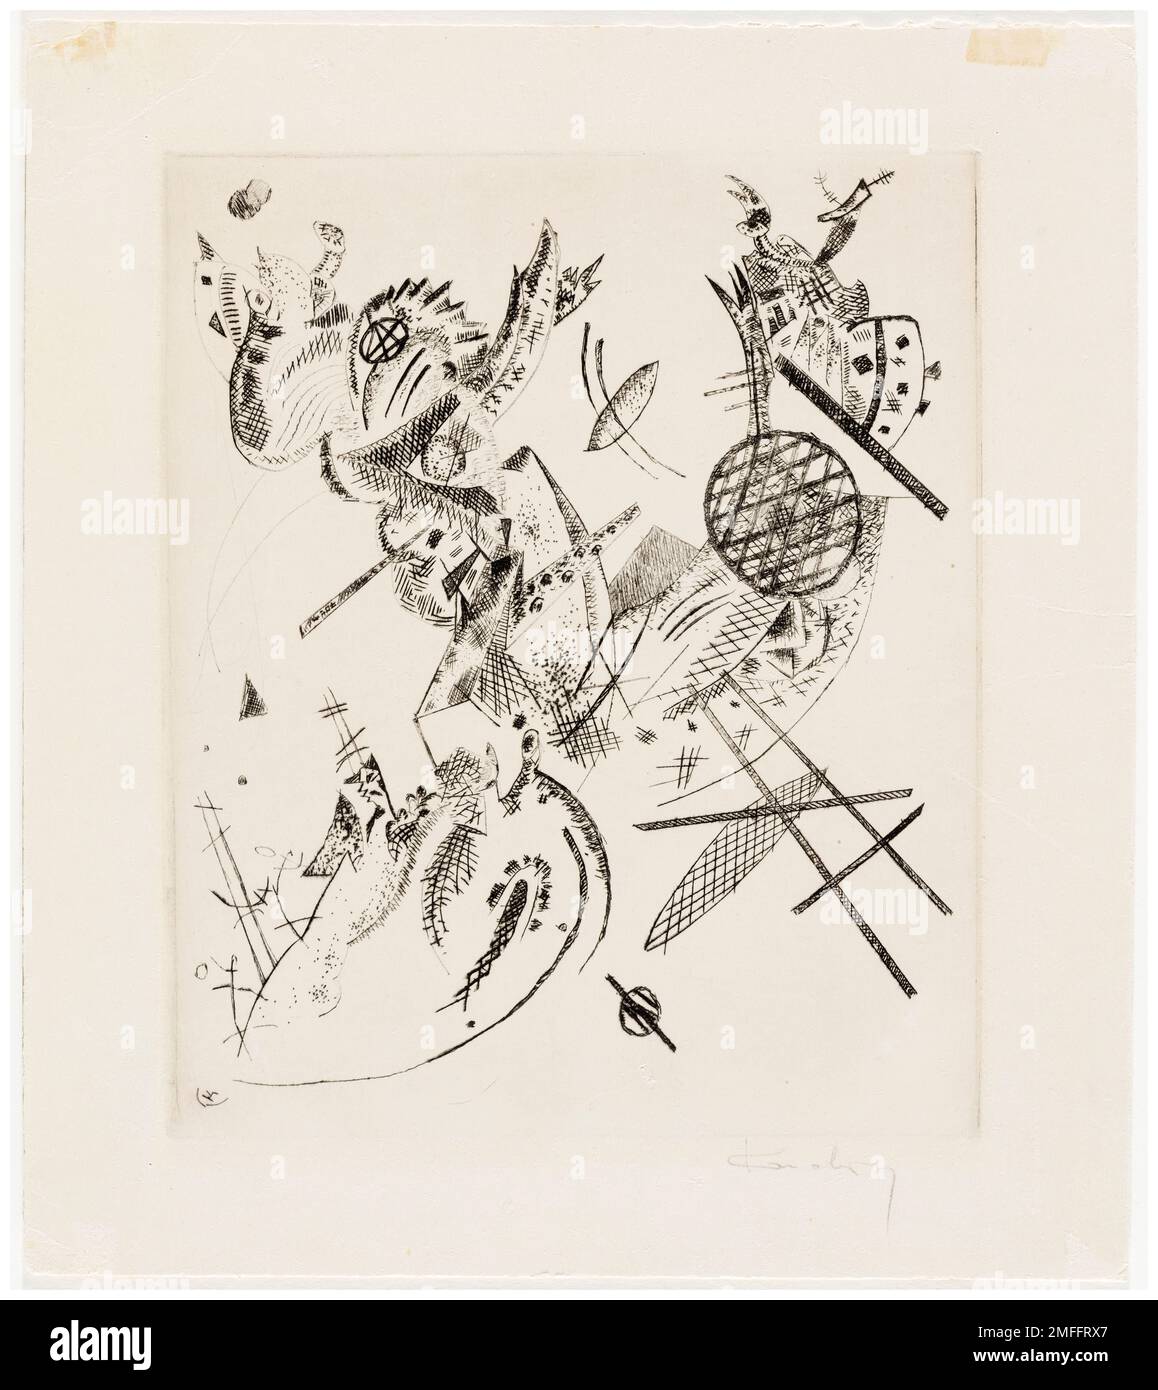 Wassily Kandinsky, Kleine Welten XII (Small Worlds XII), abstract drawing, 1922 Stock Photo